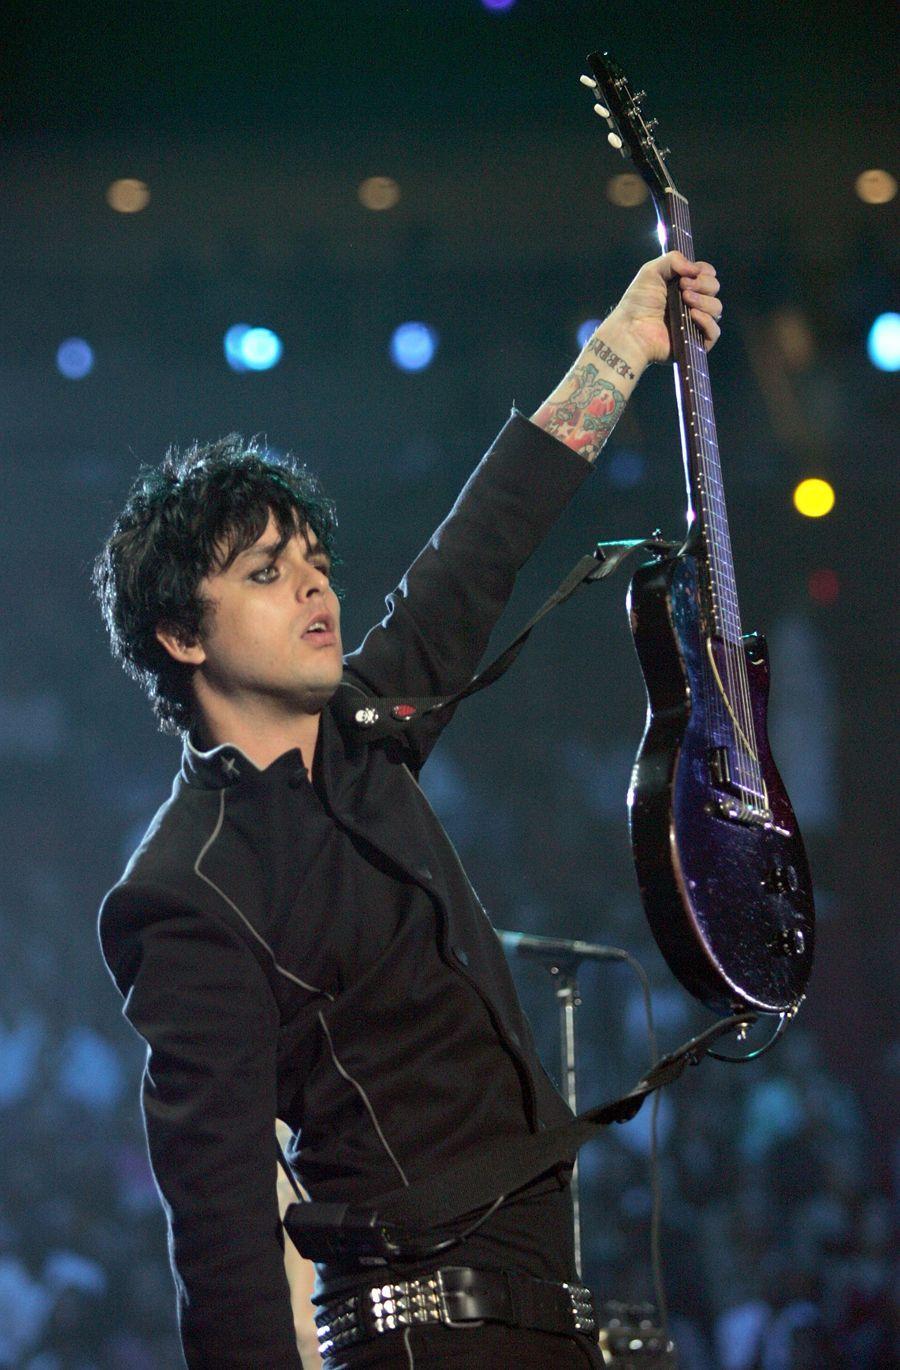 BILLIE JOE ARMSTRONG TATTOOS PICTURES IMAGES PICS PHOTOS OF HIS